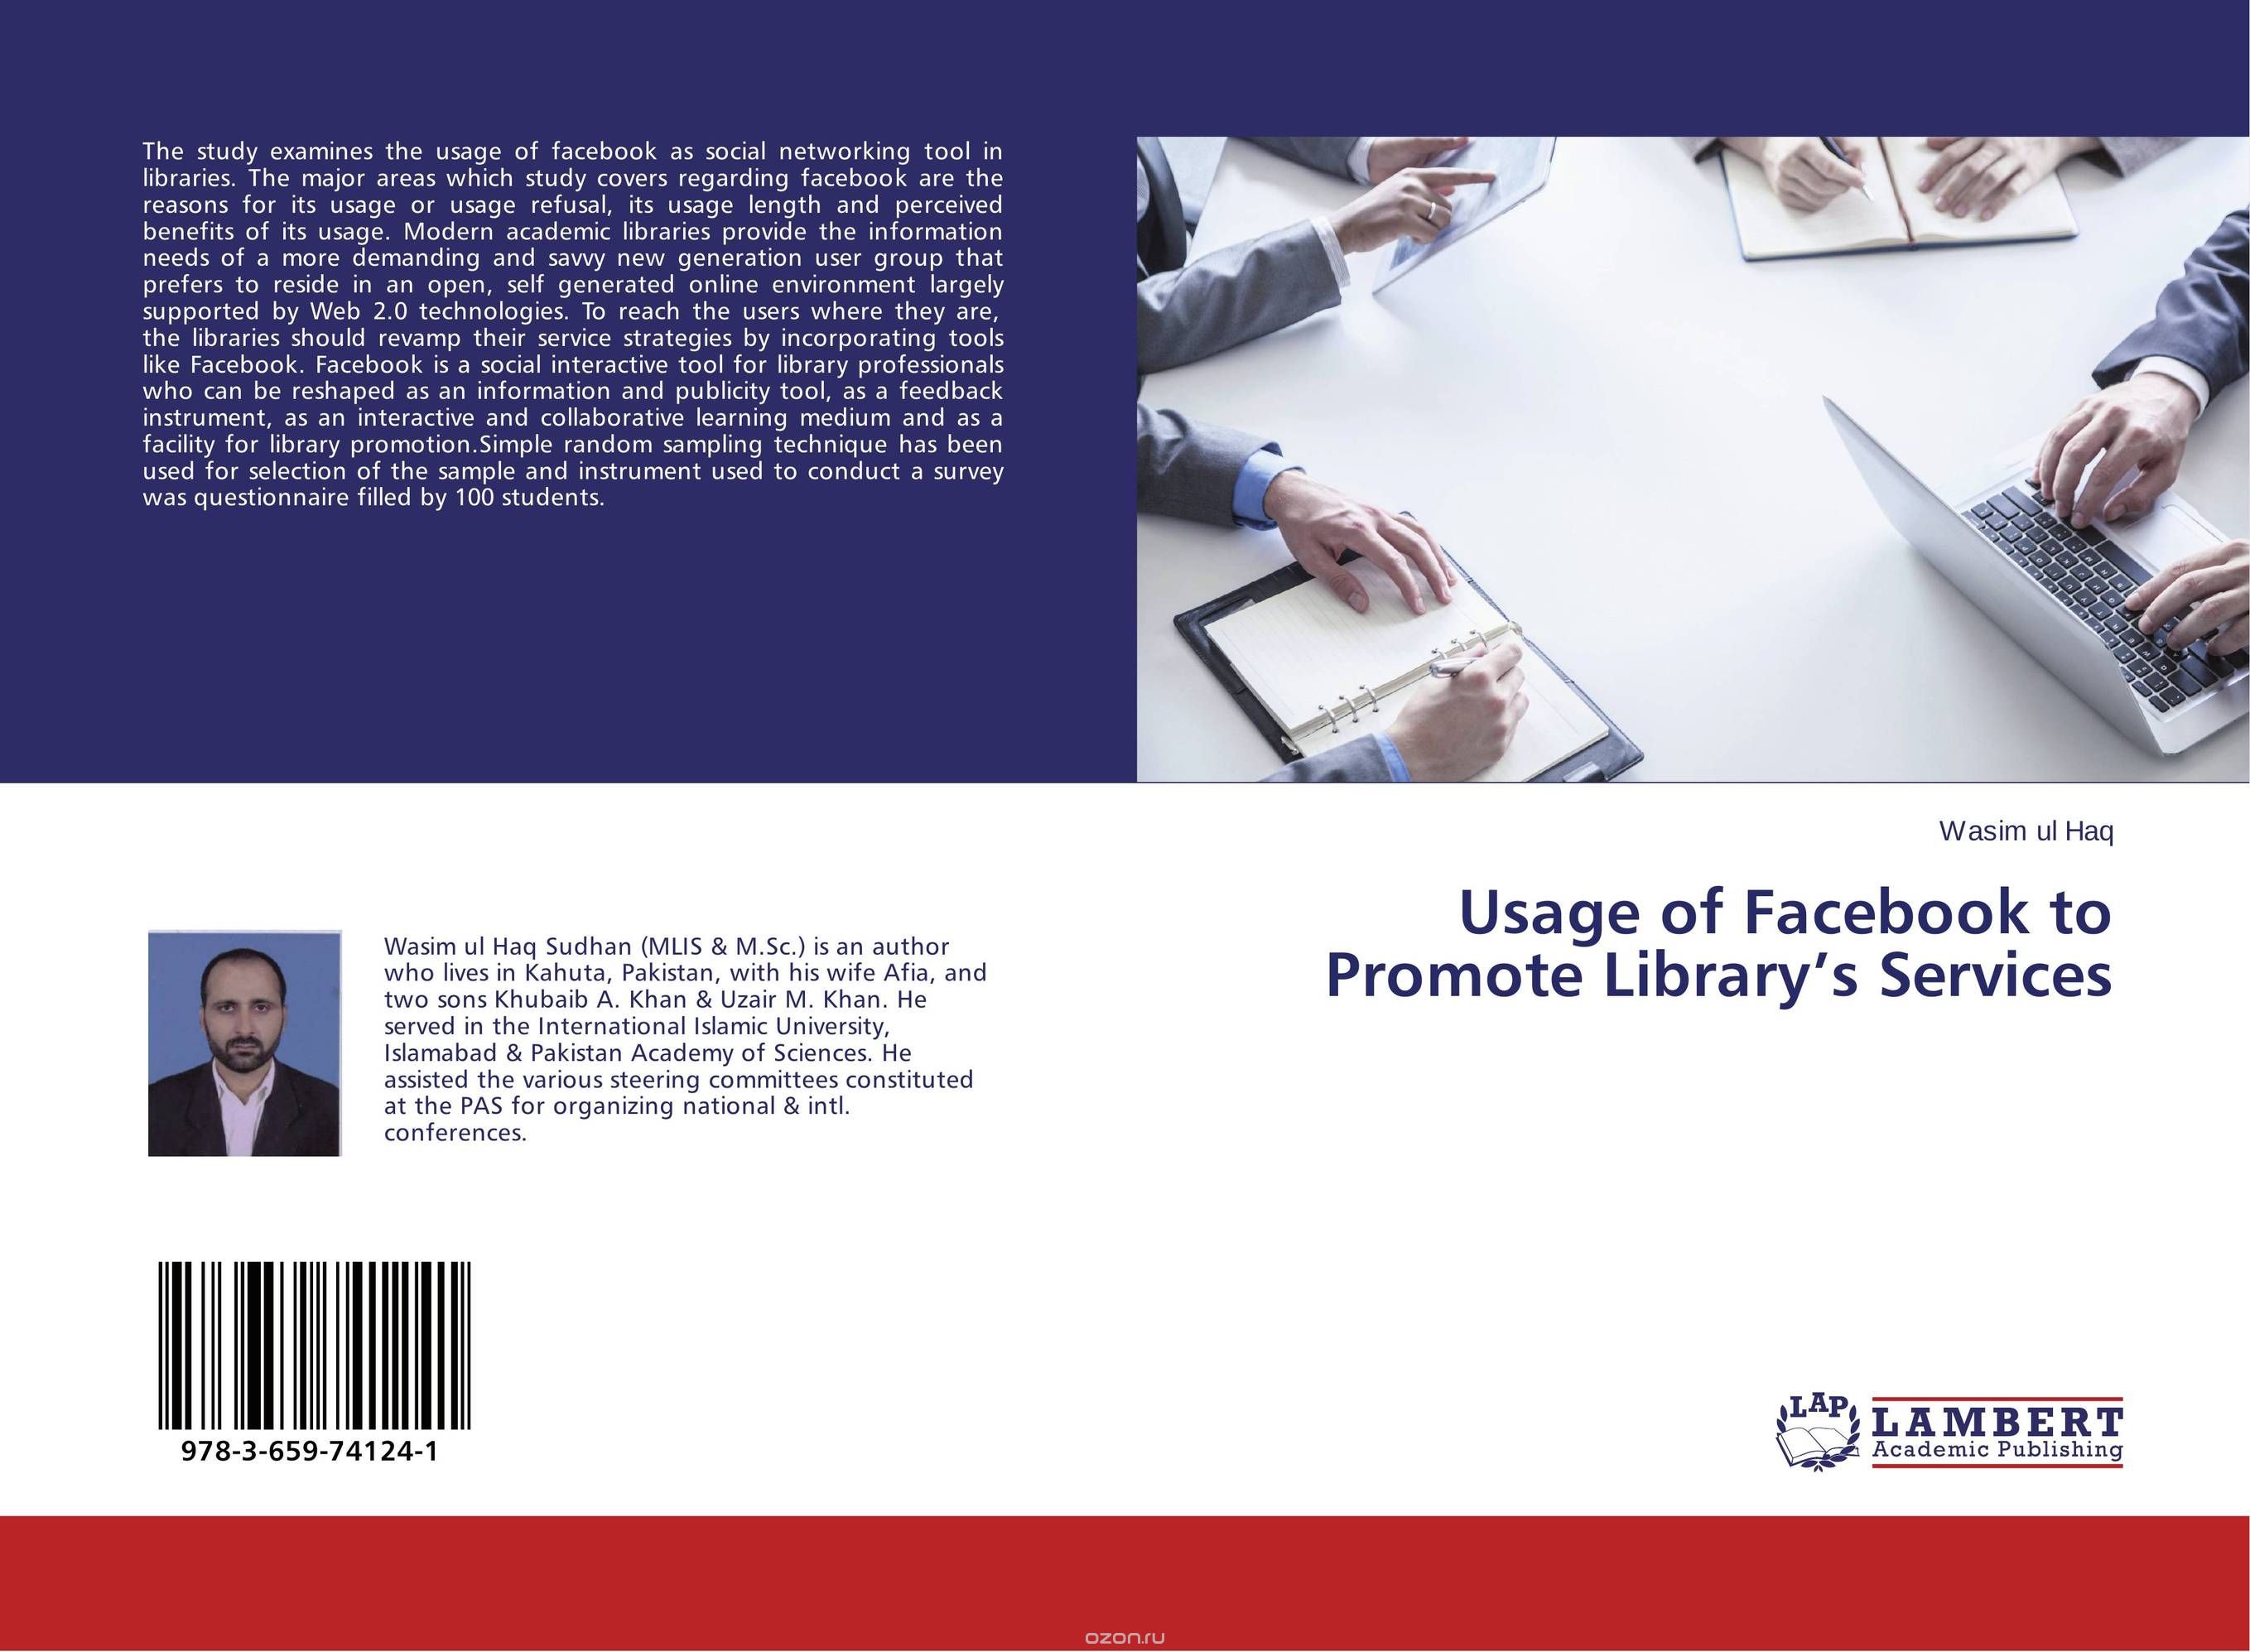 Usage of Facebook to Promote Library’s Services